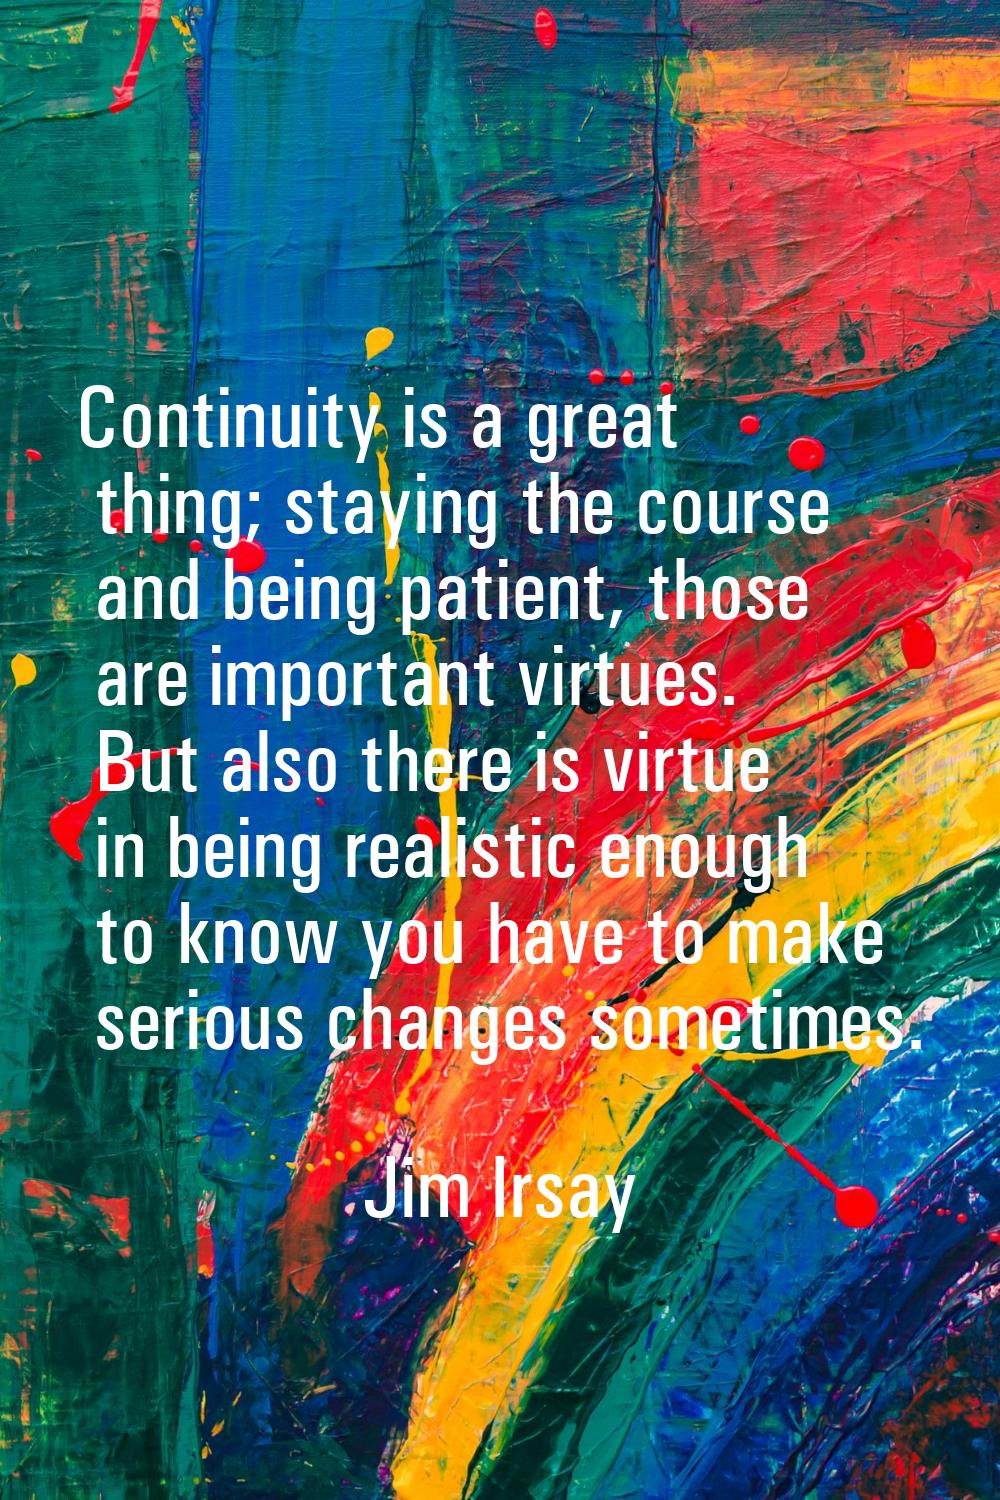 Continuity is a great thing; staying the course and being patient, those are important virtues. But